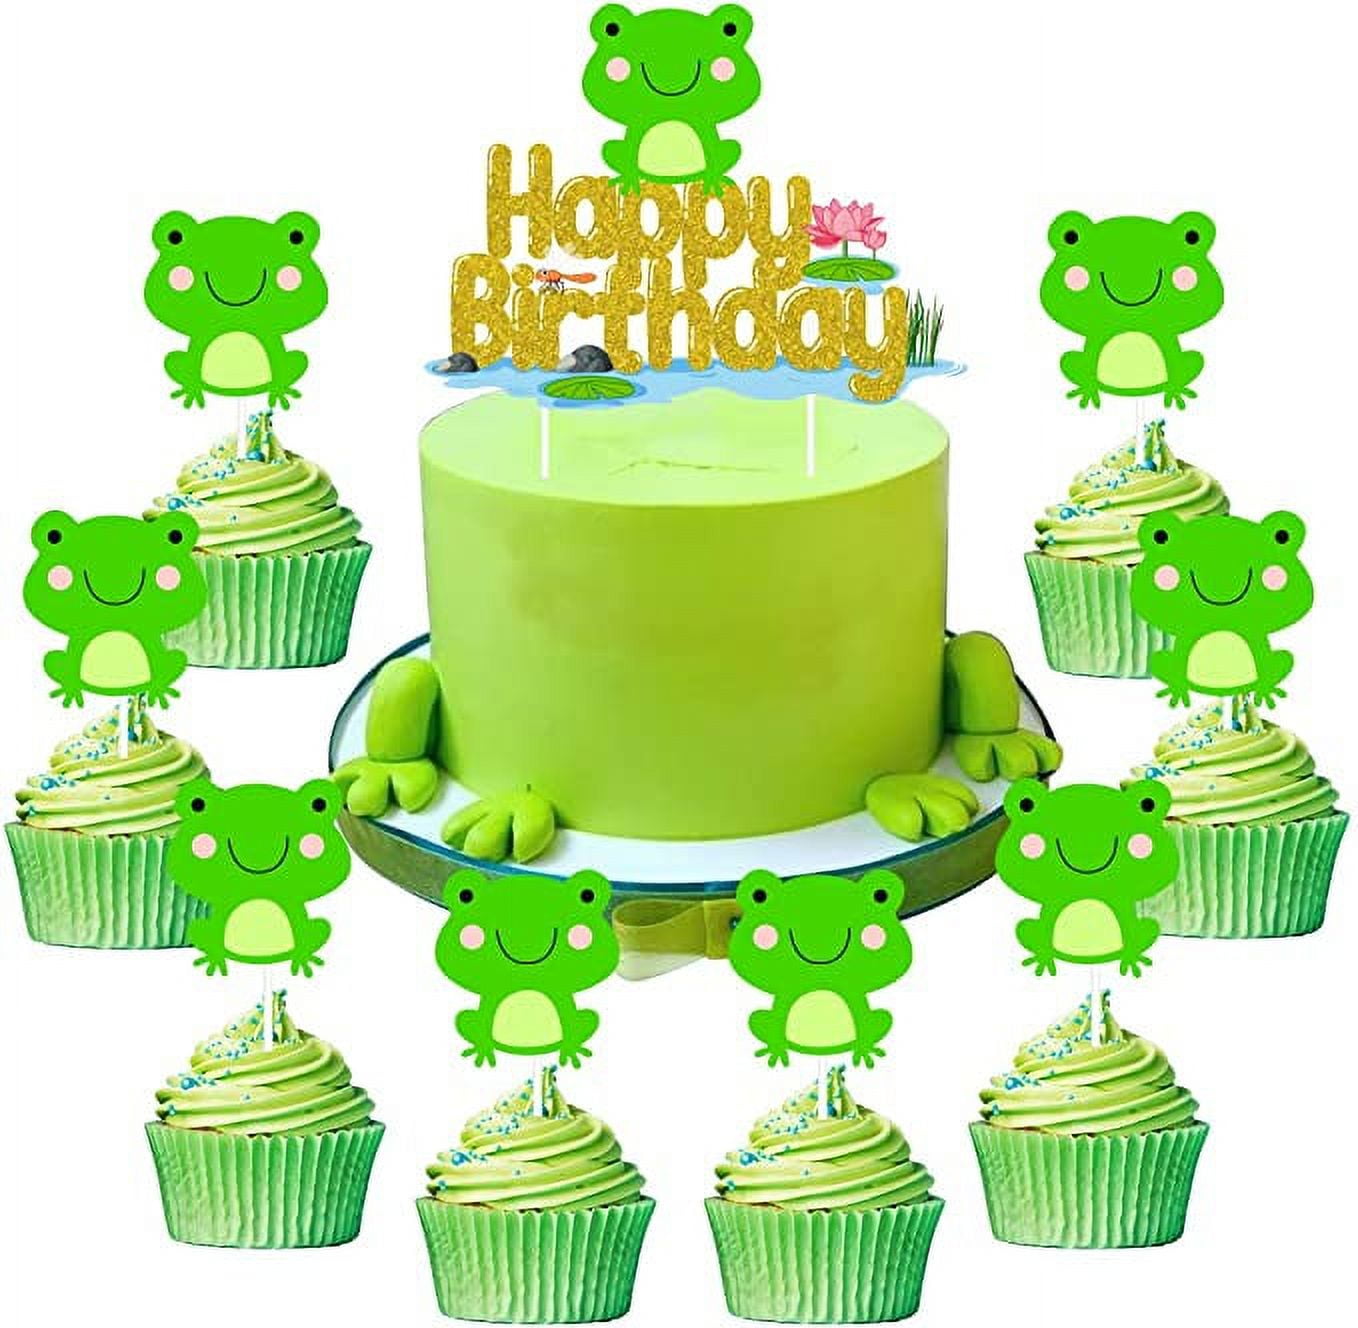 Frog Cake Decorations Cupcake Toppers